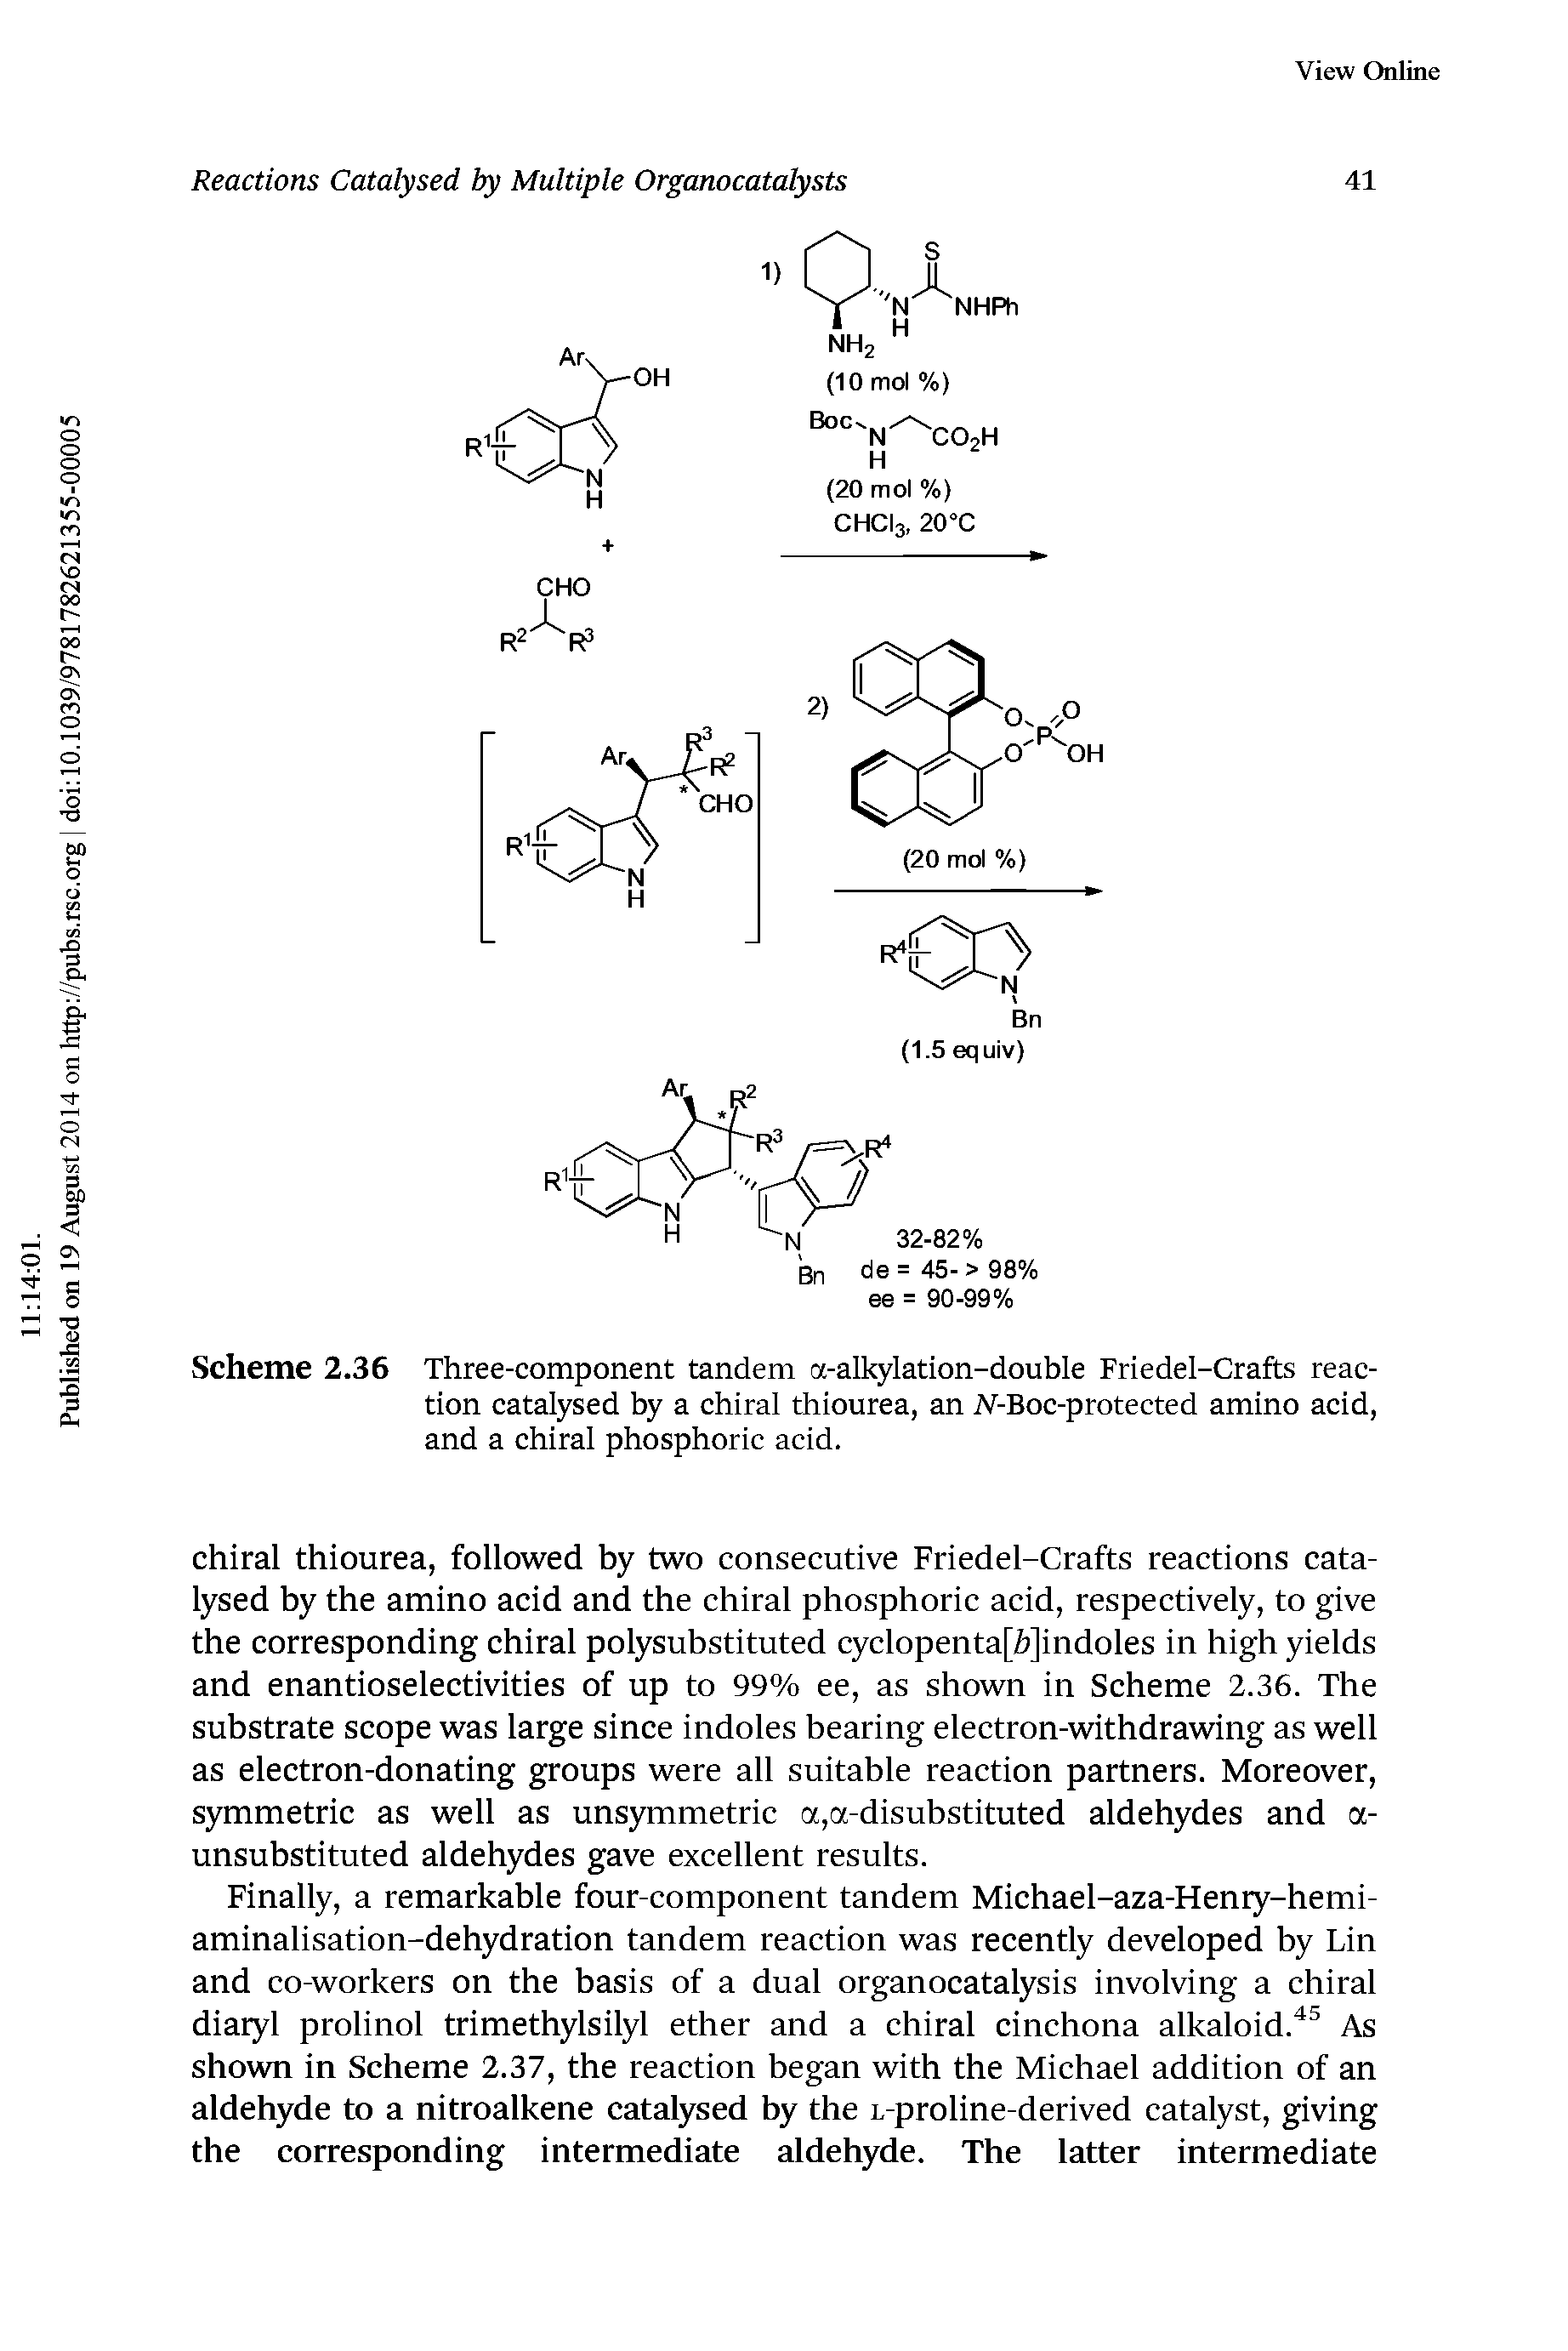 Scheme 2.36 Three-component tandem ot-alkylation-double Friedel-Crafts reaction catalysed by a chiral thiourea, an iV-Boc-protected amino acid, and a chiral phosphoric acid.